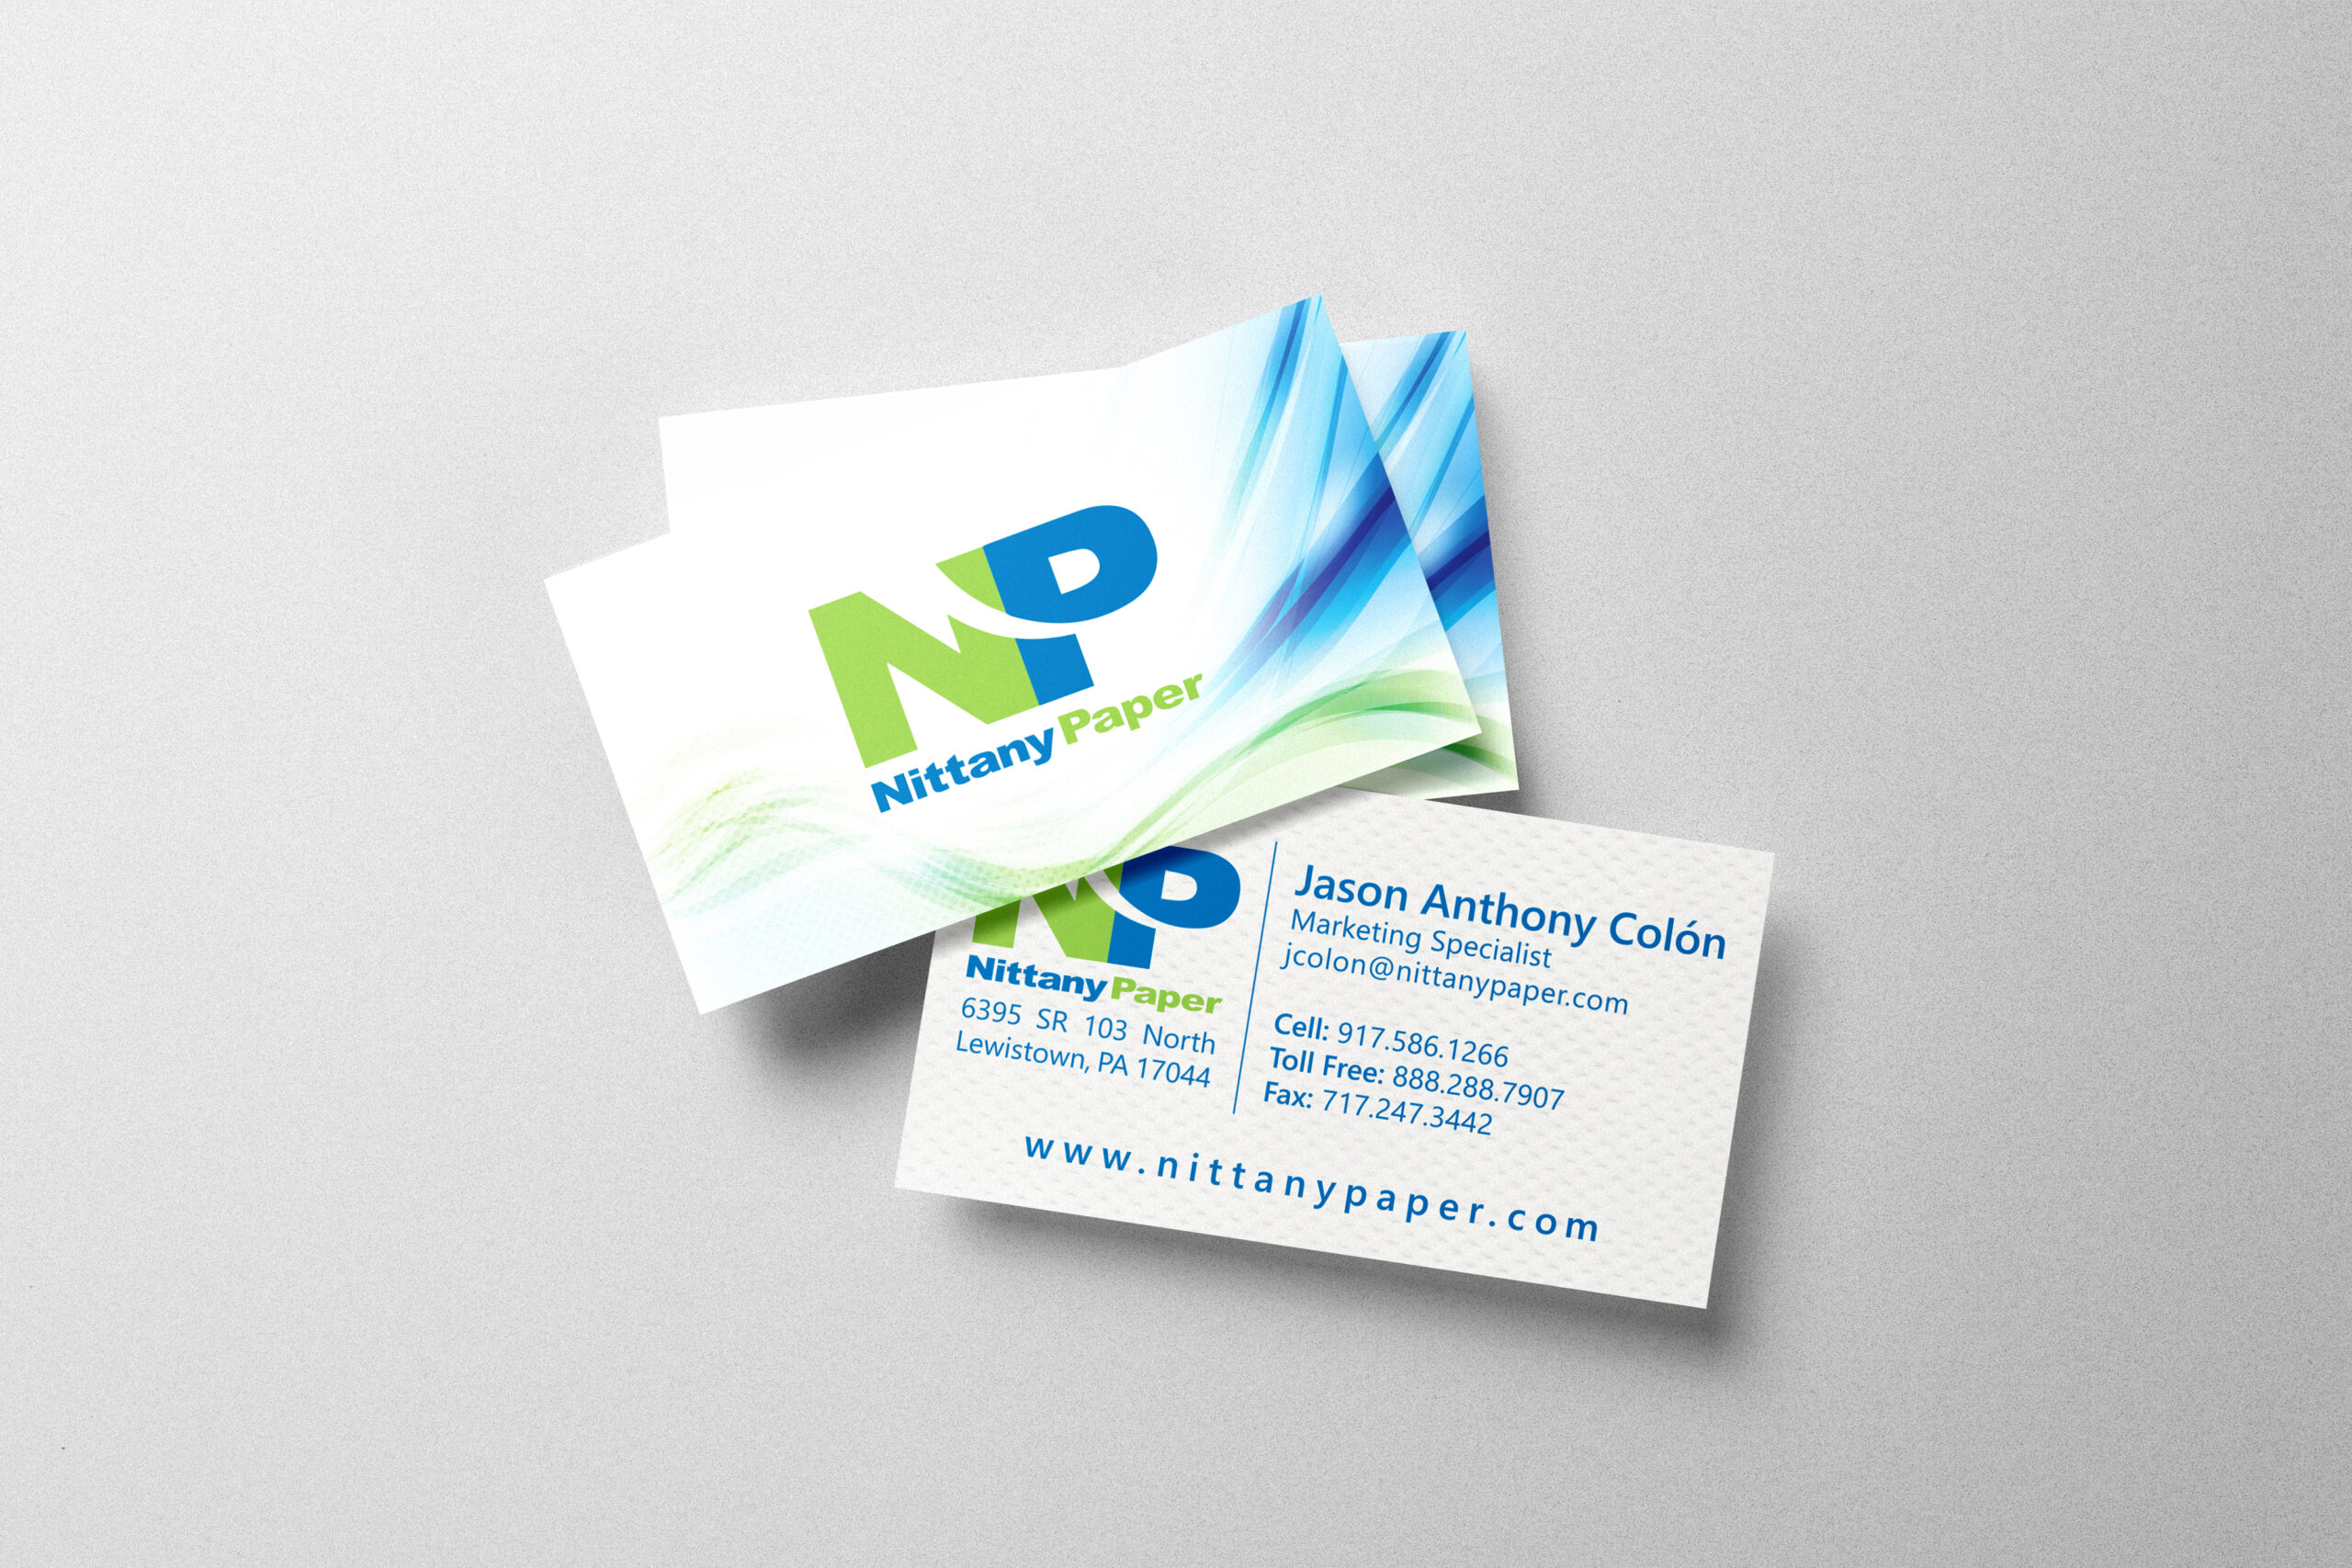 Business Cards - Nittany Paper Mills LLC